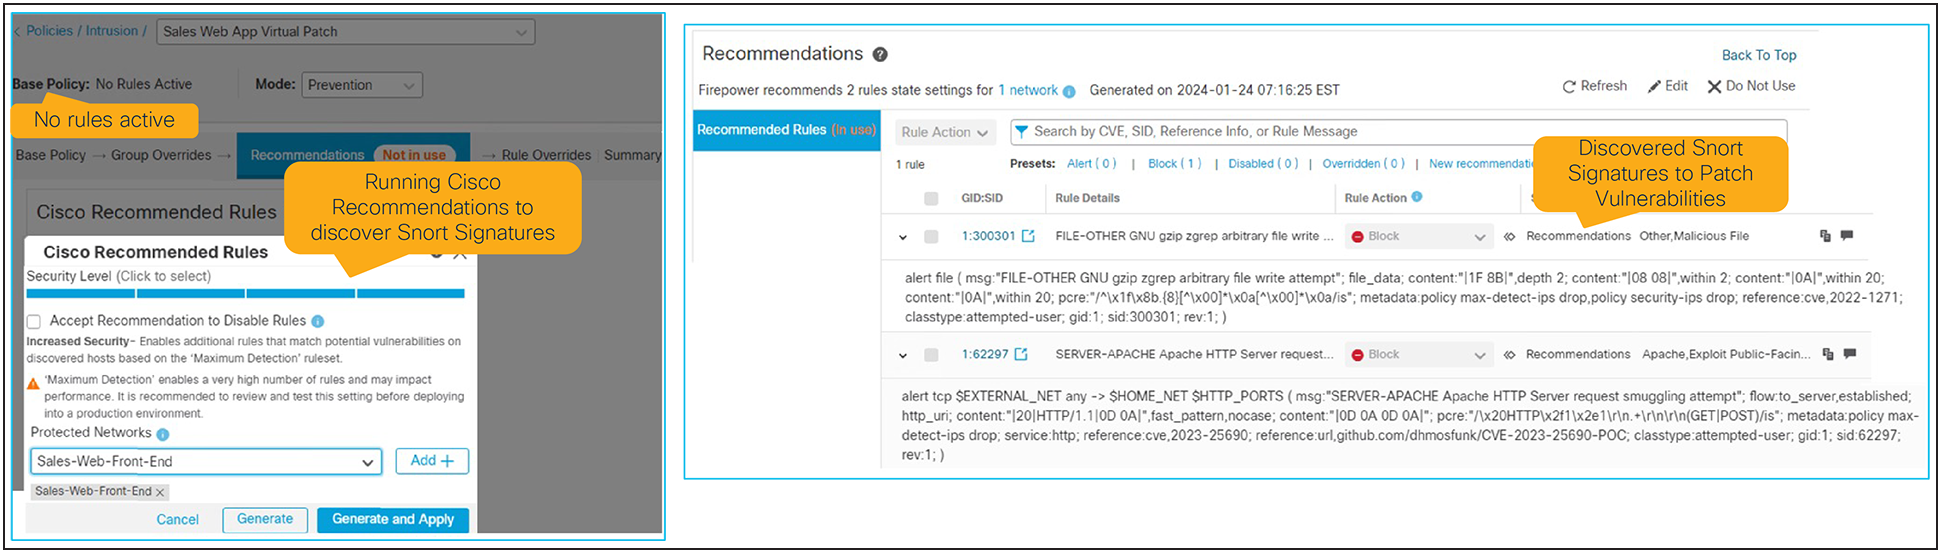 Discovering Snort Signatures with Cisco Recommended Rules